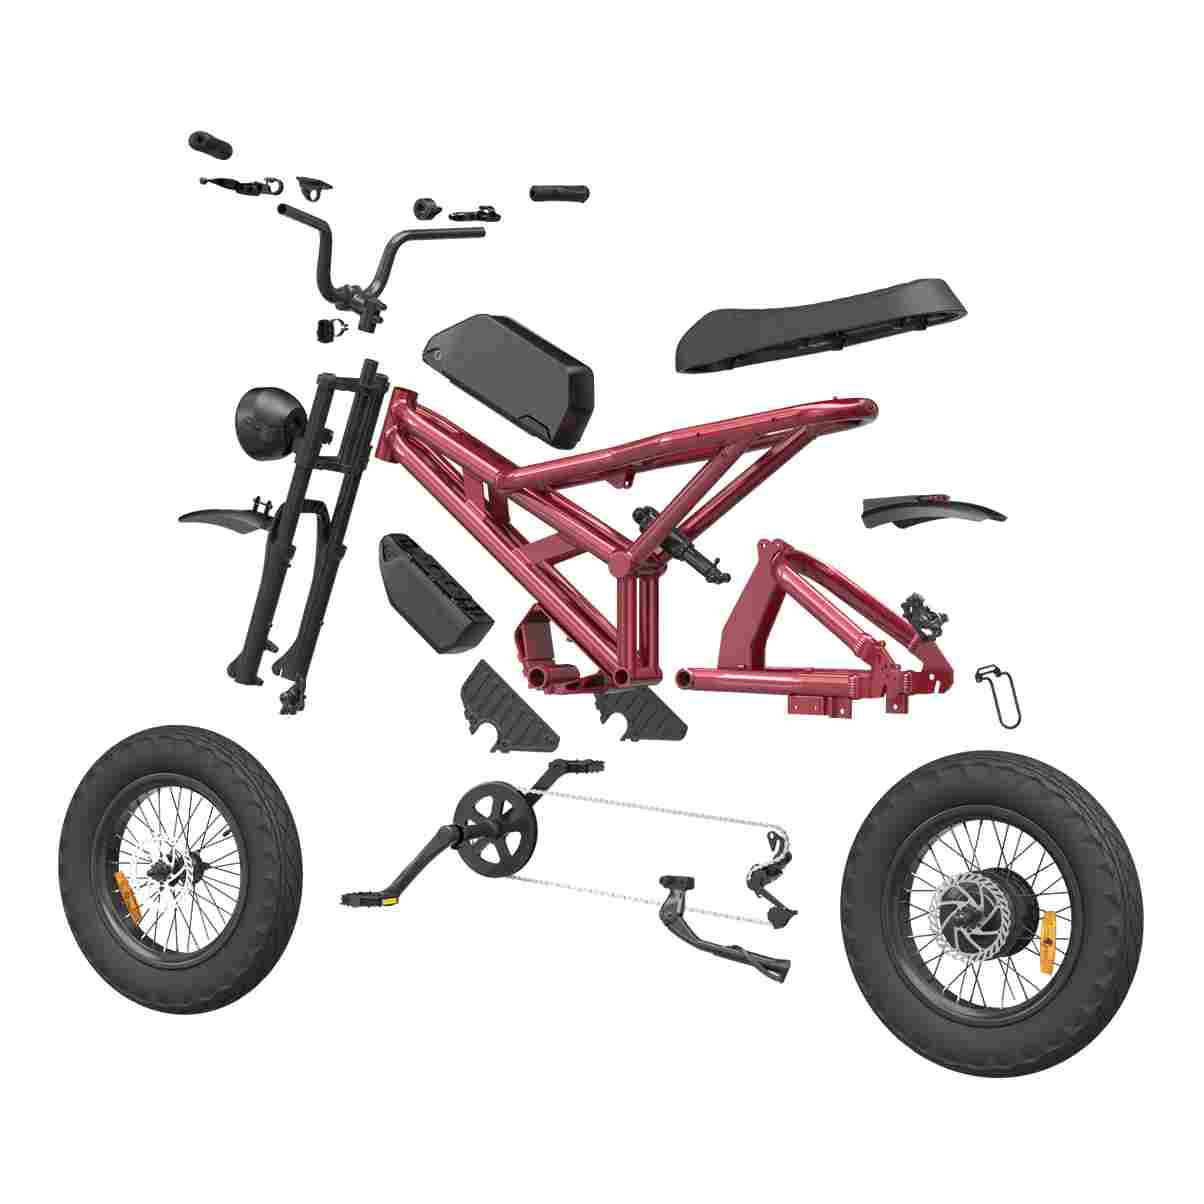 Best Budget Electric Motorcycle wholesale price